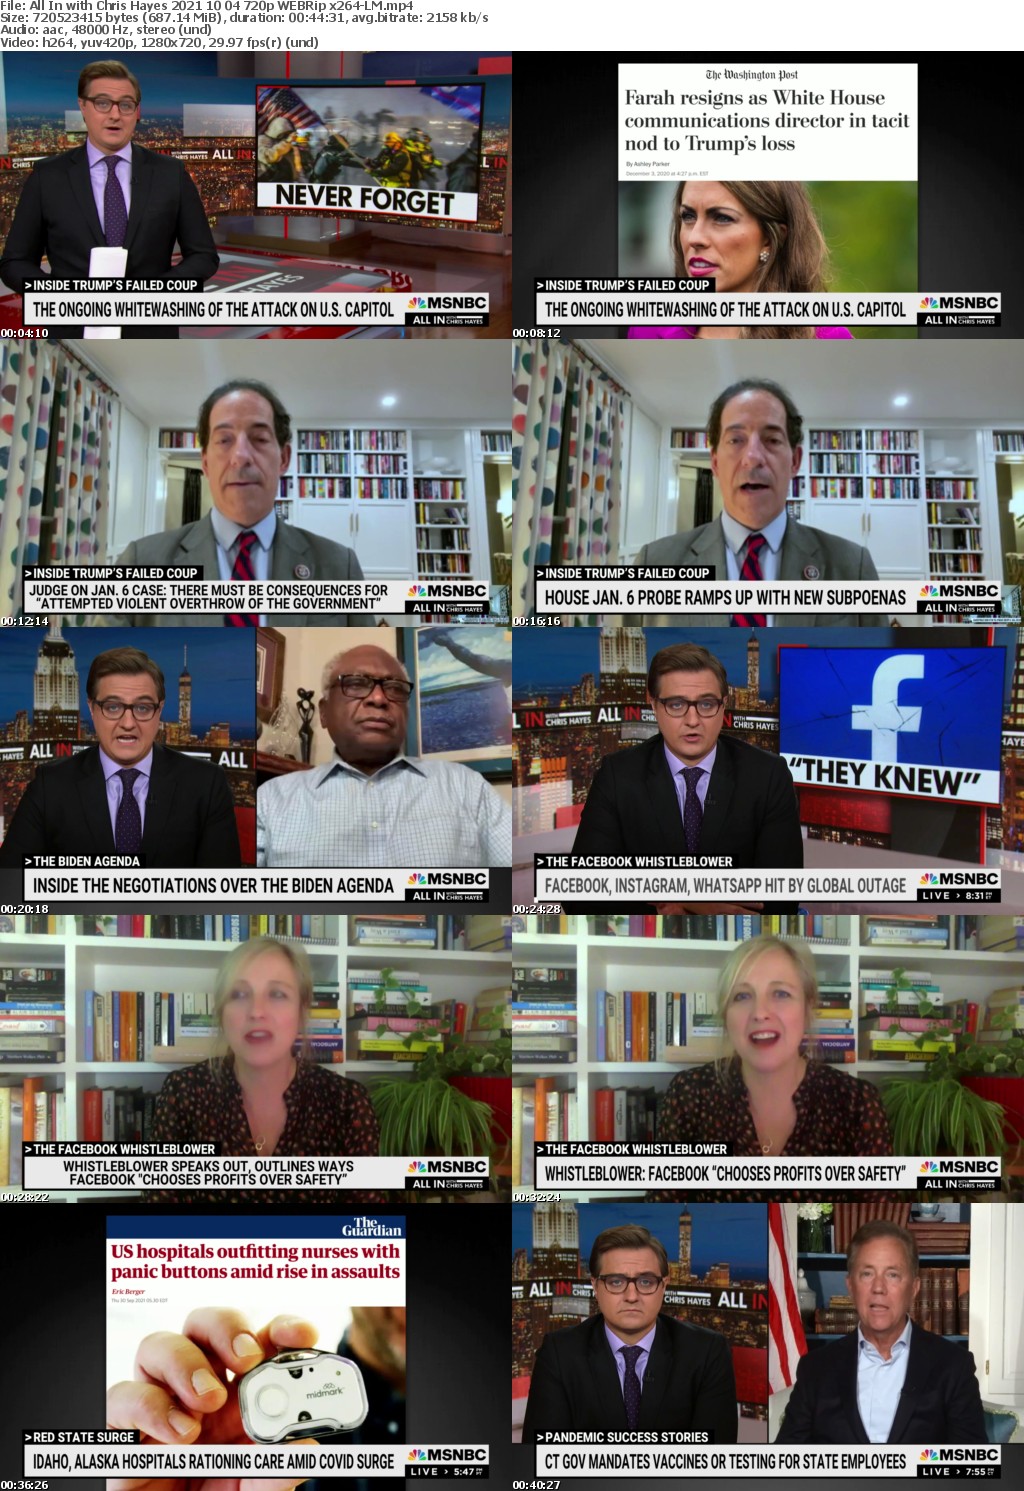 All In with Chris Hayes 2021 10 04 720p WEBRip x264-LM